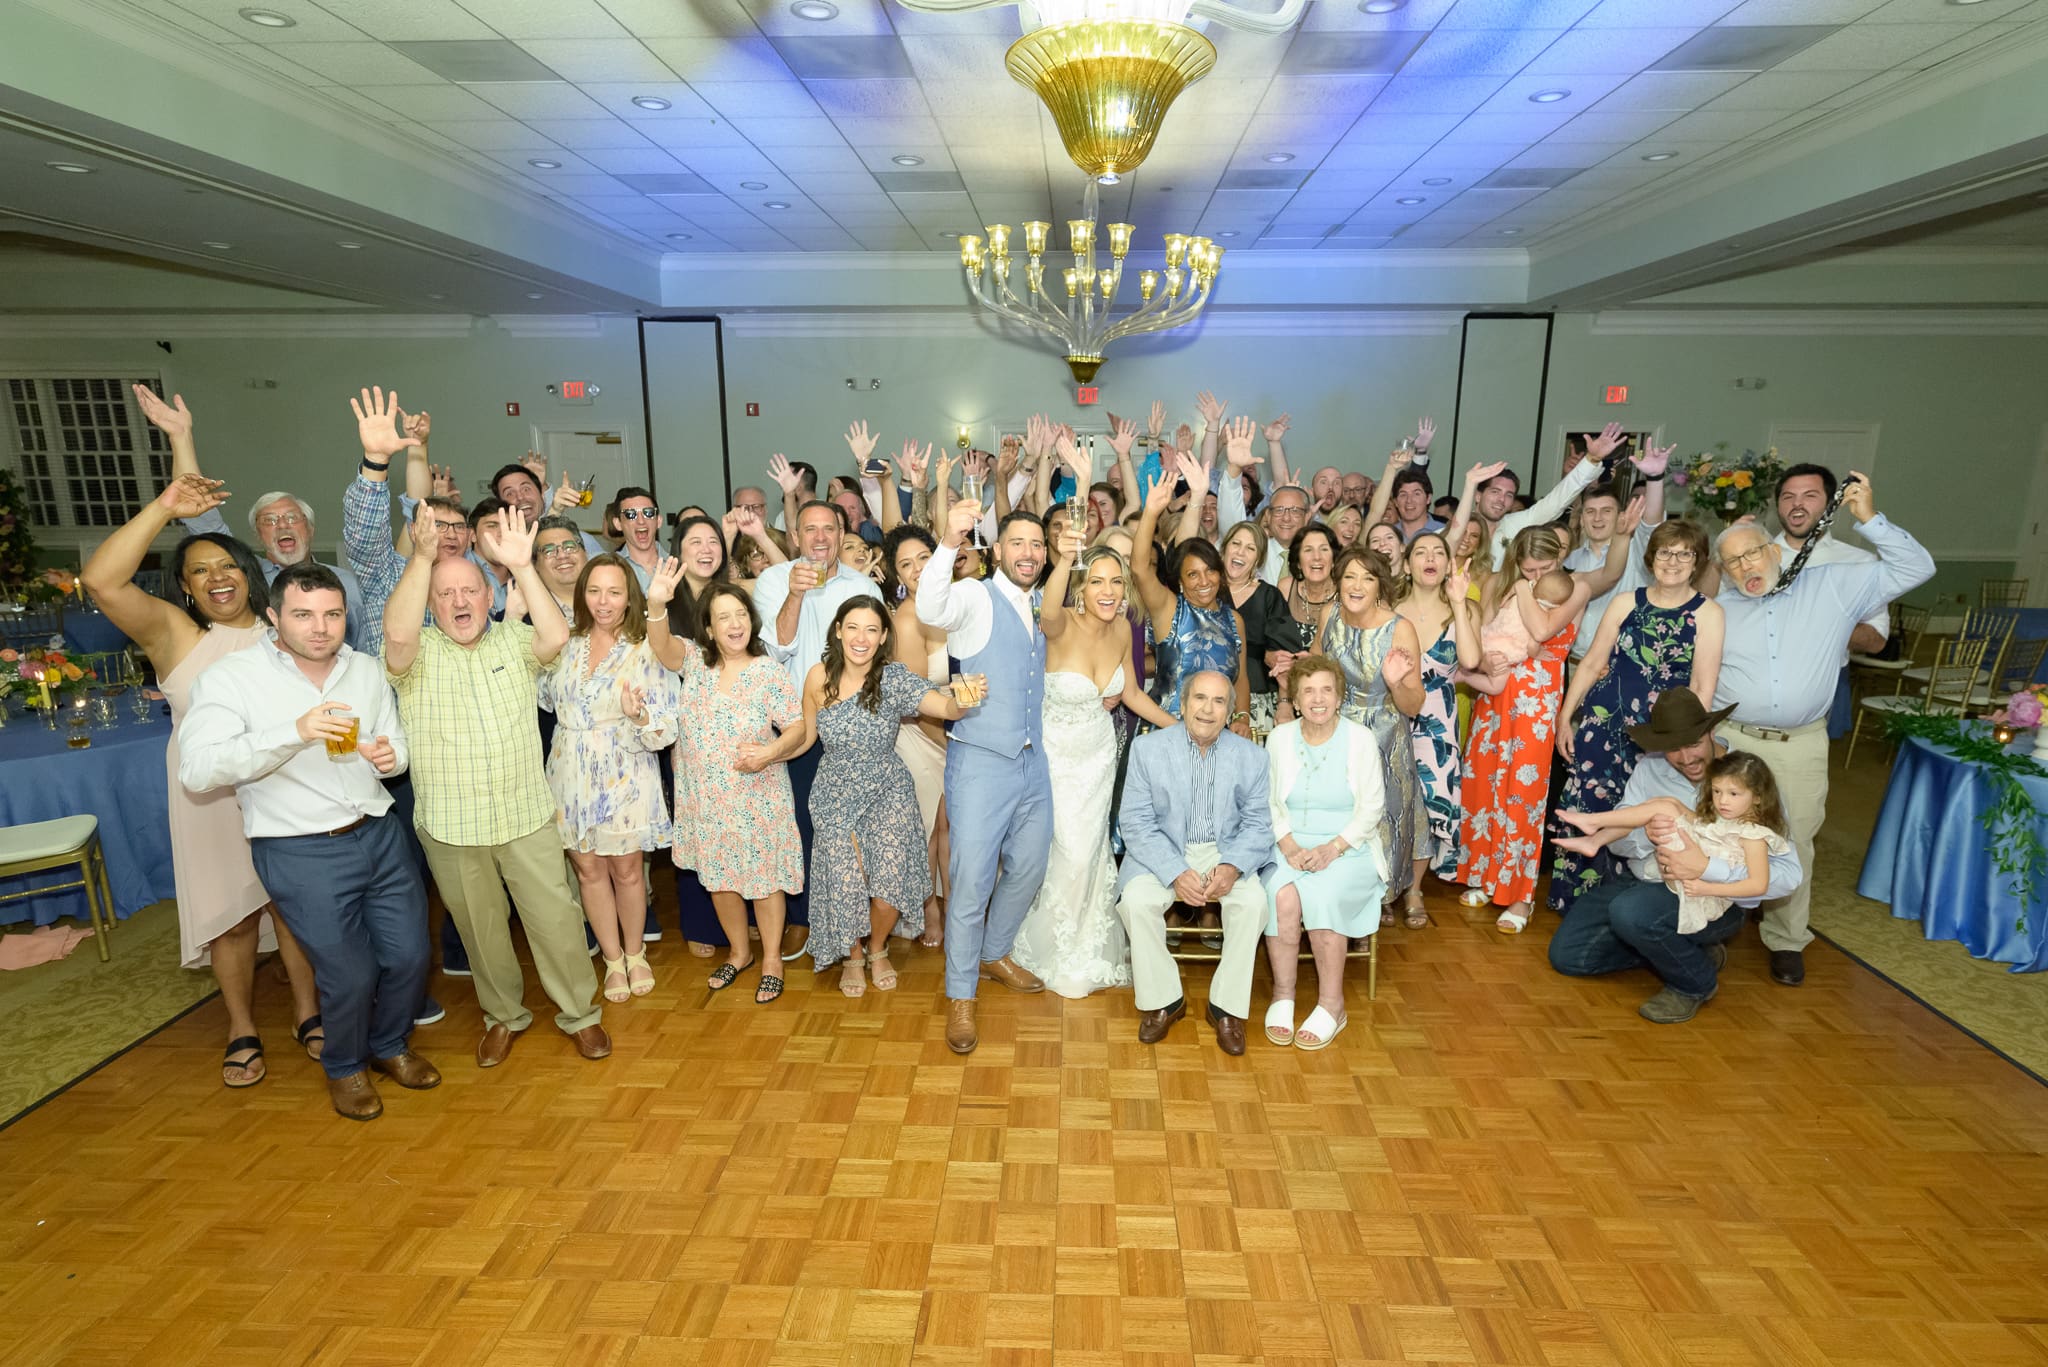 Getting portrait of entire group on the dance floor - Pawleys Plantation Golf & Country Club